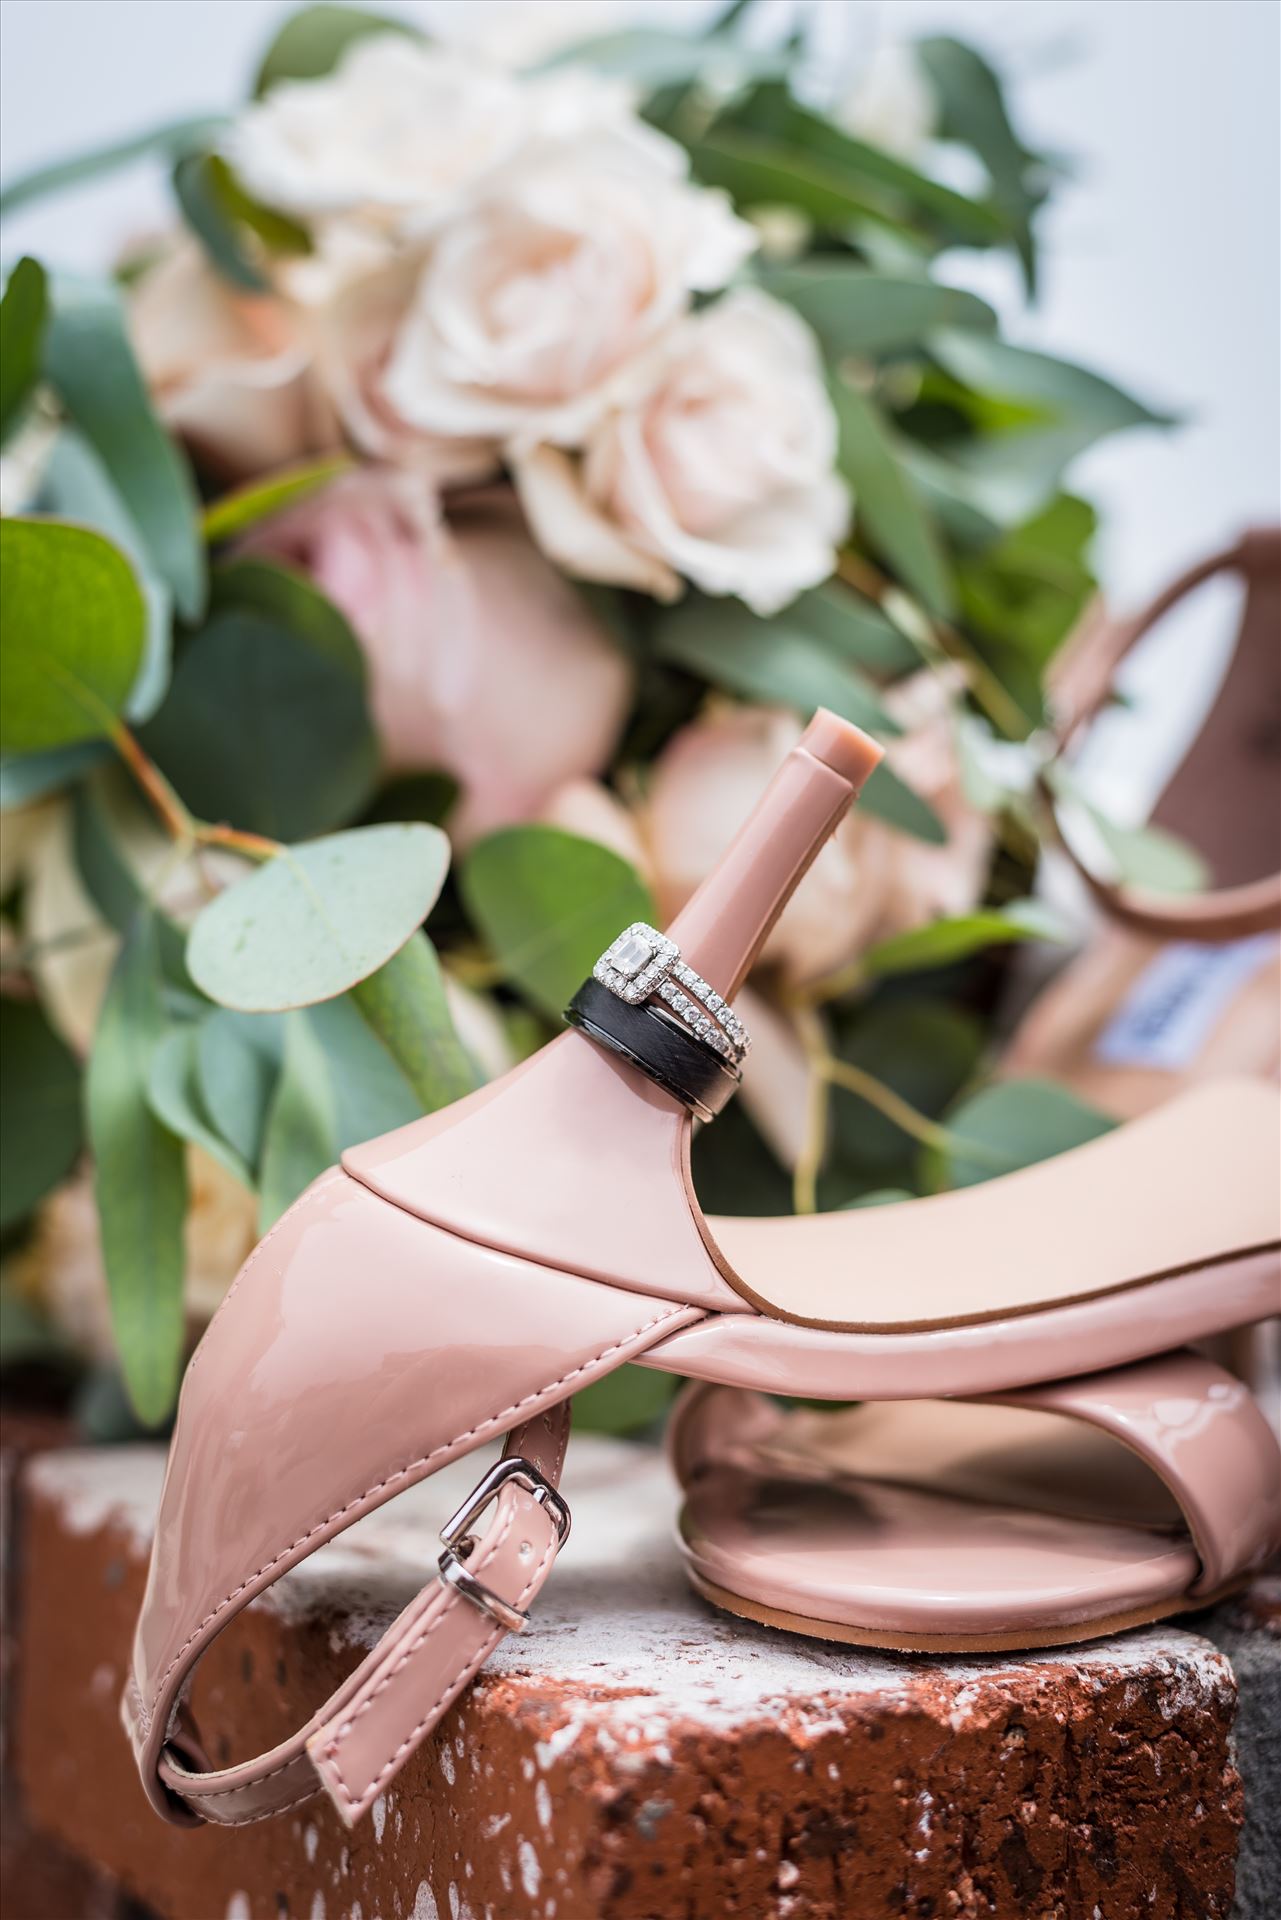 FW-5919.JPGCayucos California Beach and Bluffs Wedding near Morro Bay and Cambria with romantic chic flair by Mirror's Edge Photography, San Luis Obispo County Wedding Photographer.  Wedding rings, flowers and brides shoes